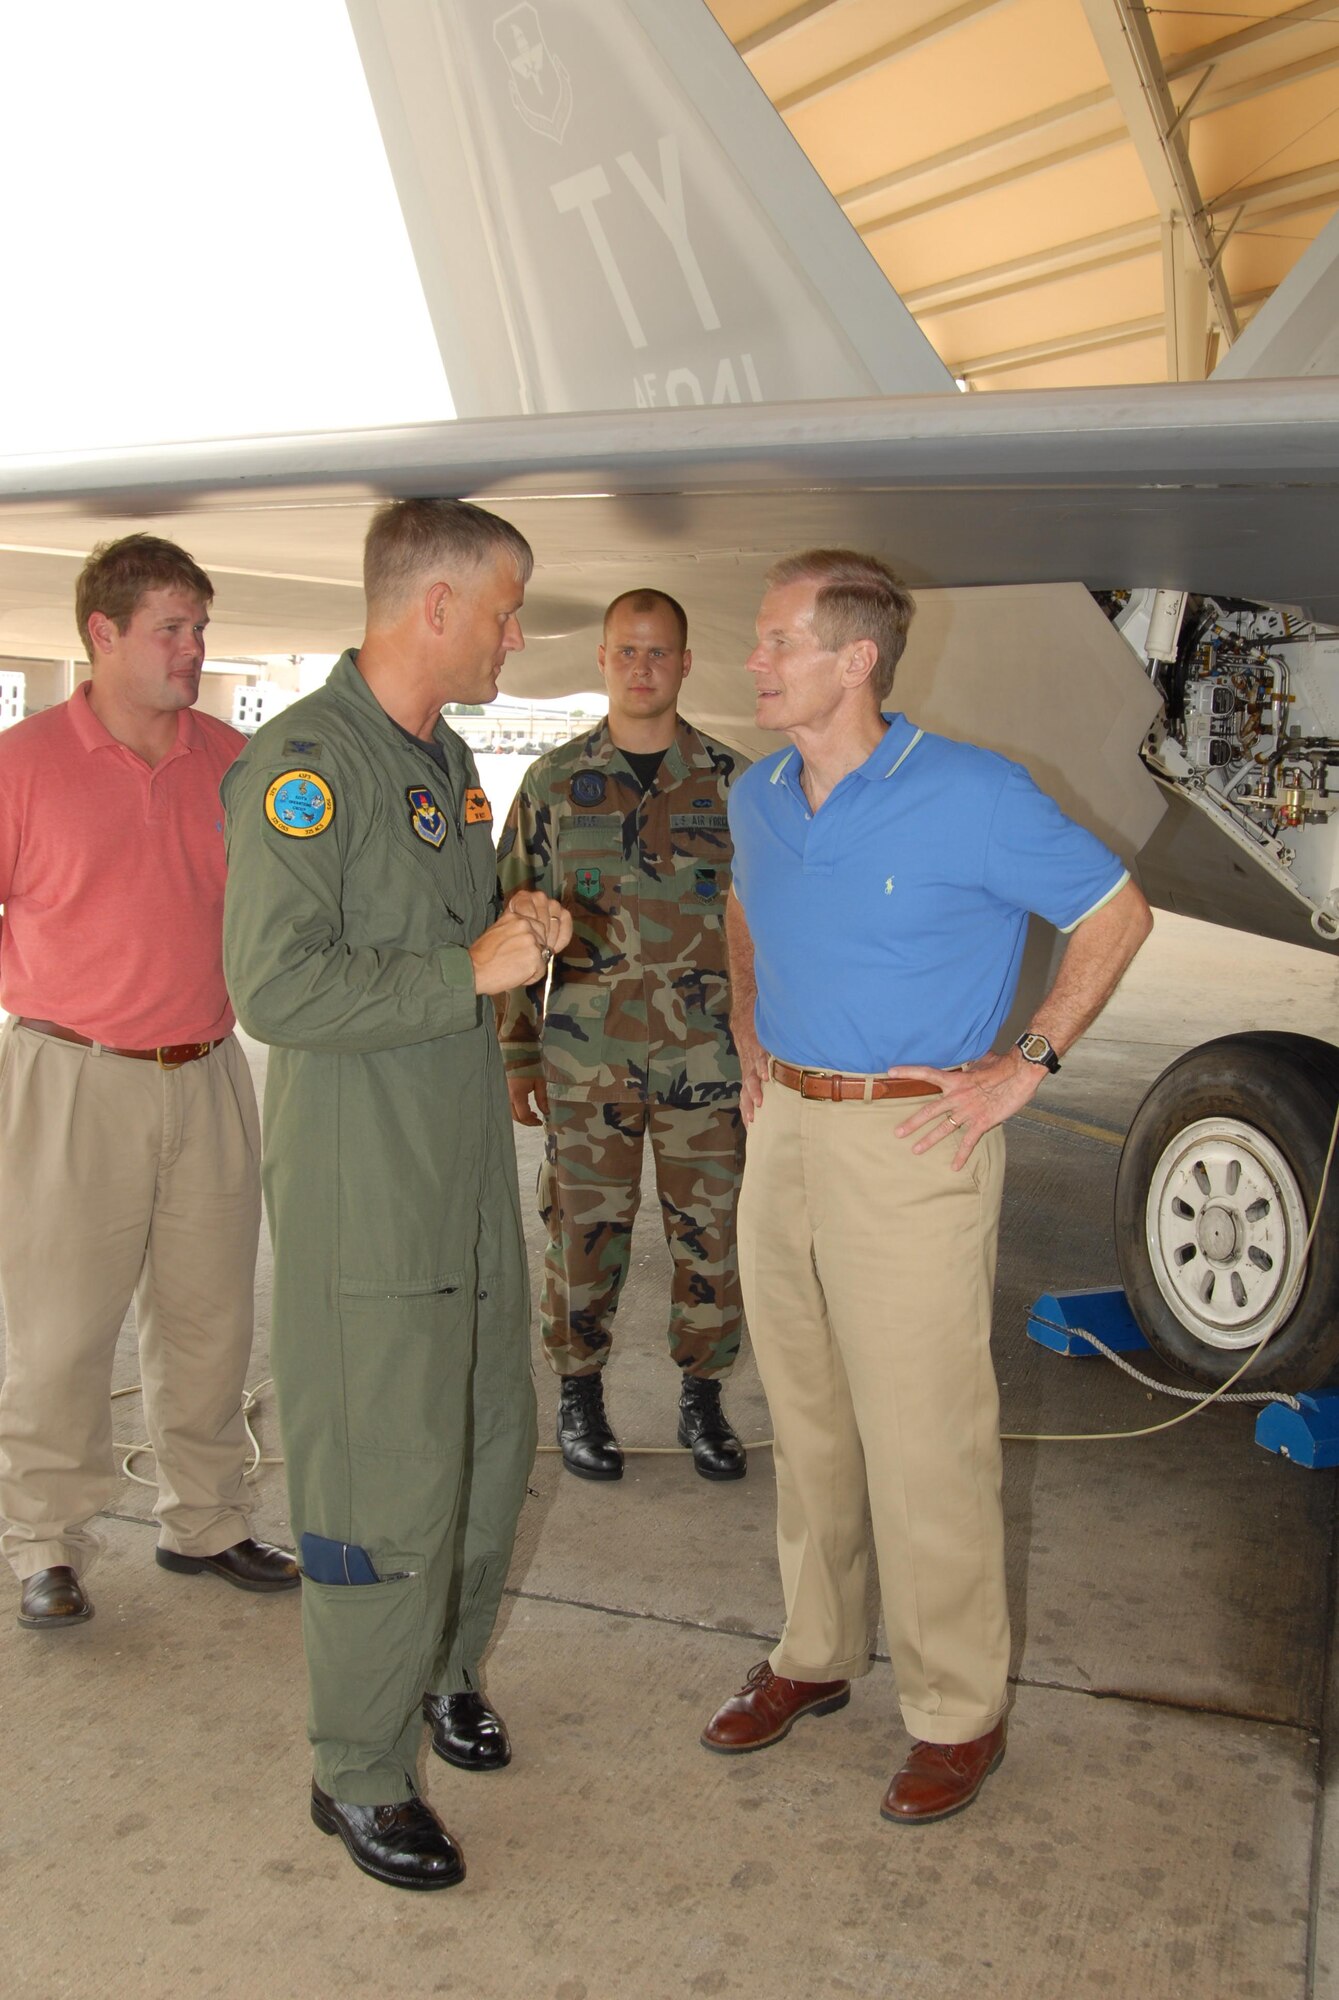 Colonel William H. Mott V, 325th Operations Group commander, briefs Florida Senator Bill Nelson on the F-22 Raptor capabilities during the senator's tour of the base August 9, 2007.  Senator Nelson visited Tyndall as part of a scheduled Florida panhandle tour.  (USAF photo/Lisa Norman)